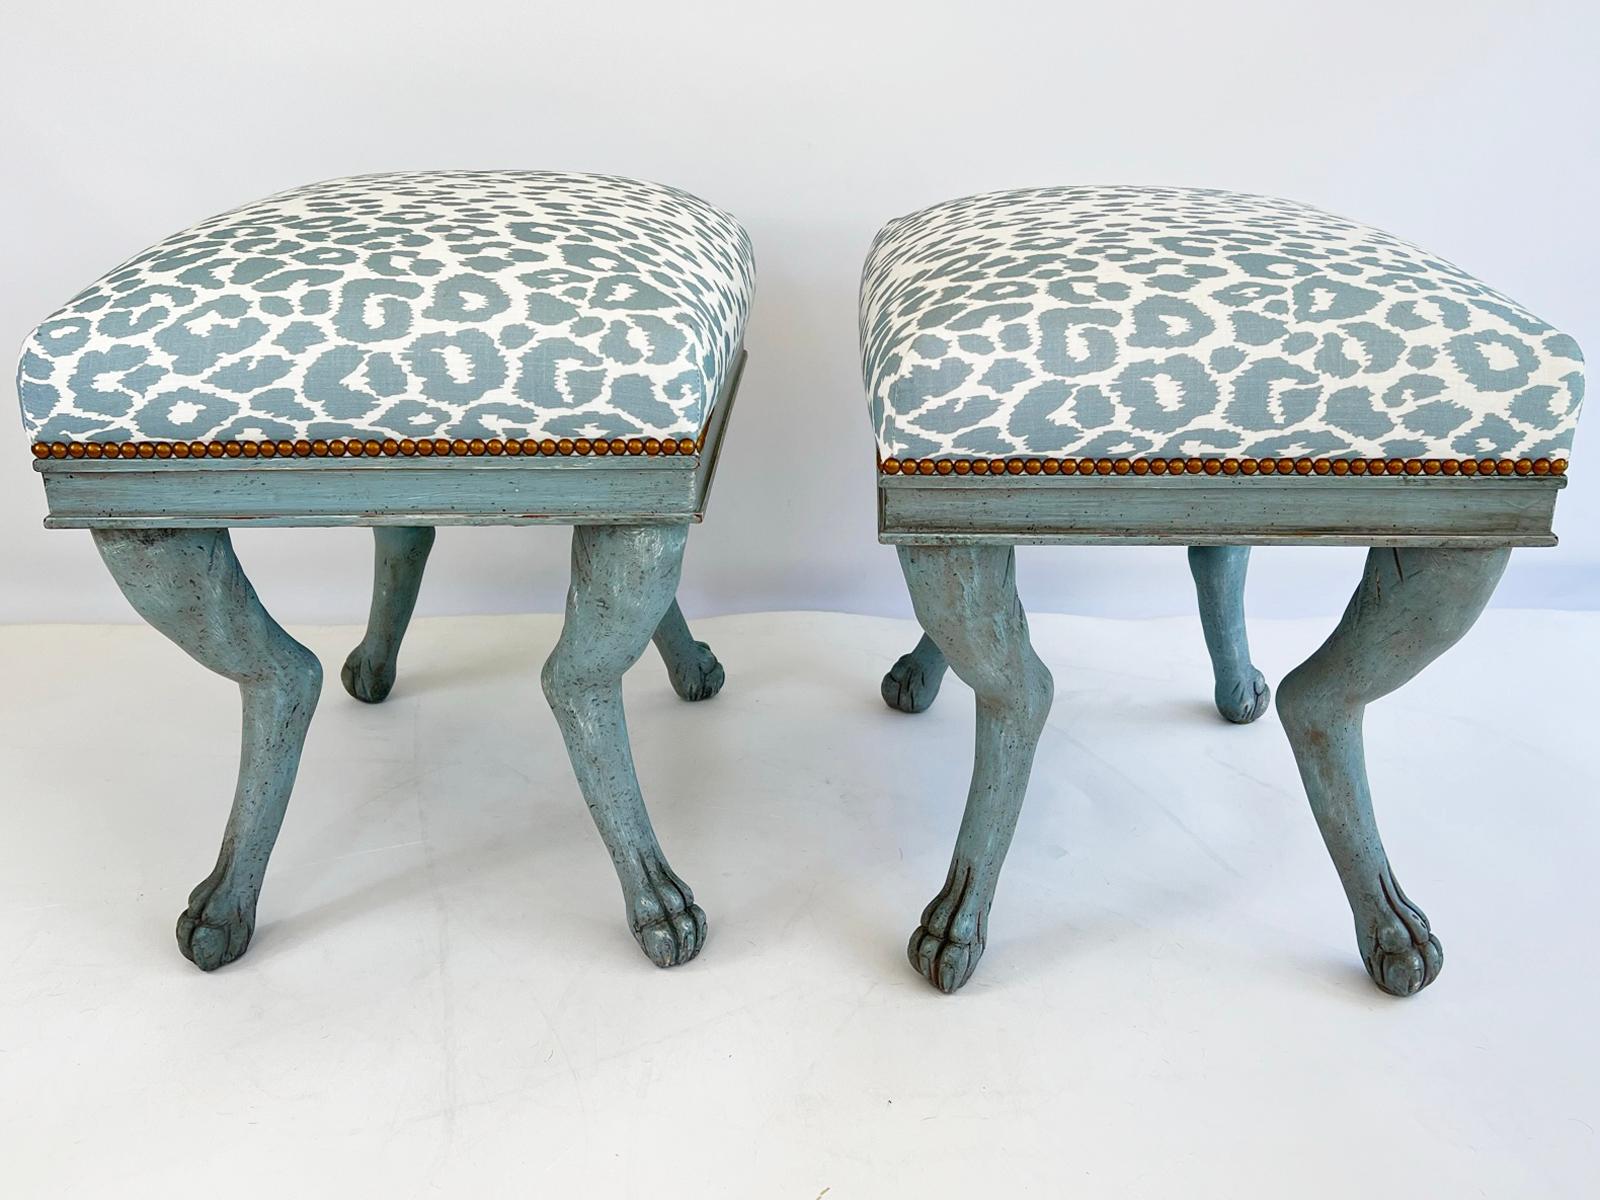 Pair of Painted Benches with Hock Legs and Paw Feet In Good Condition For Sale In West Palm Beach, FL